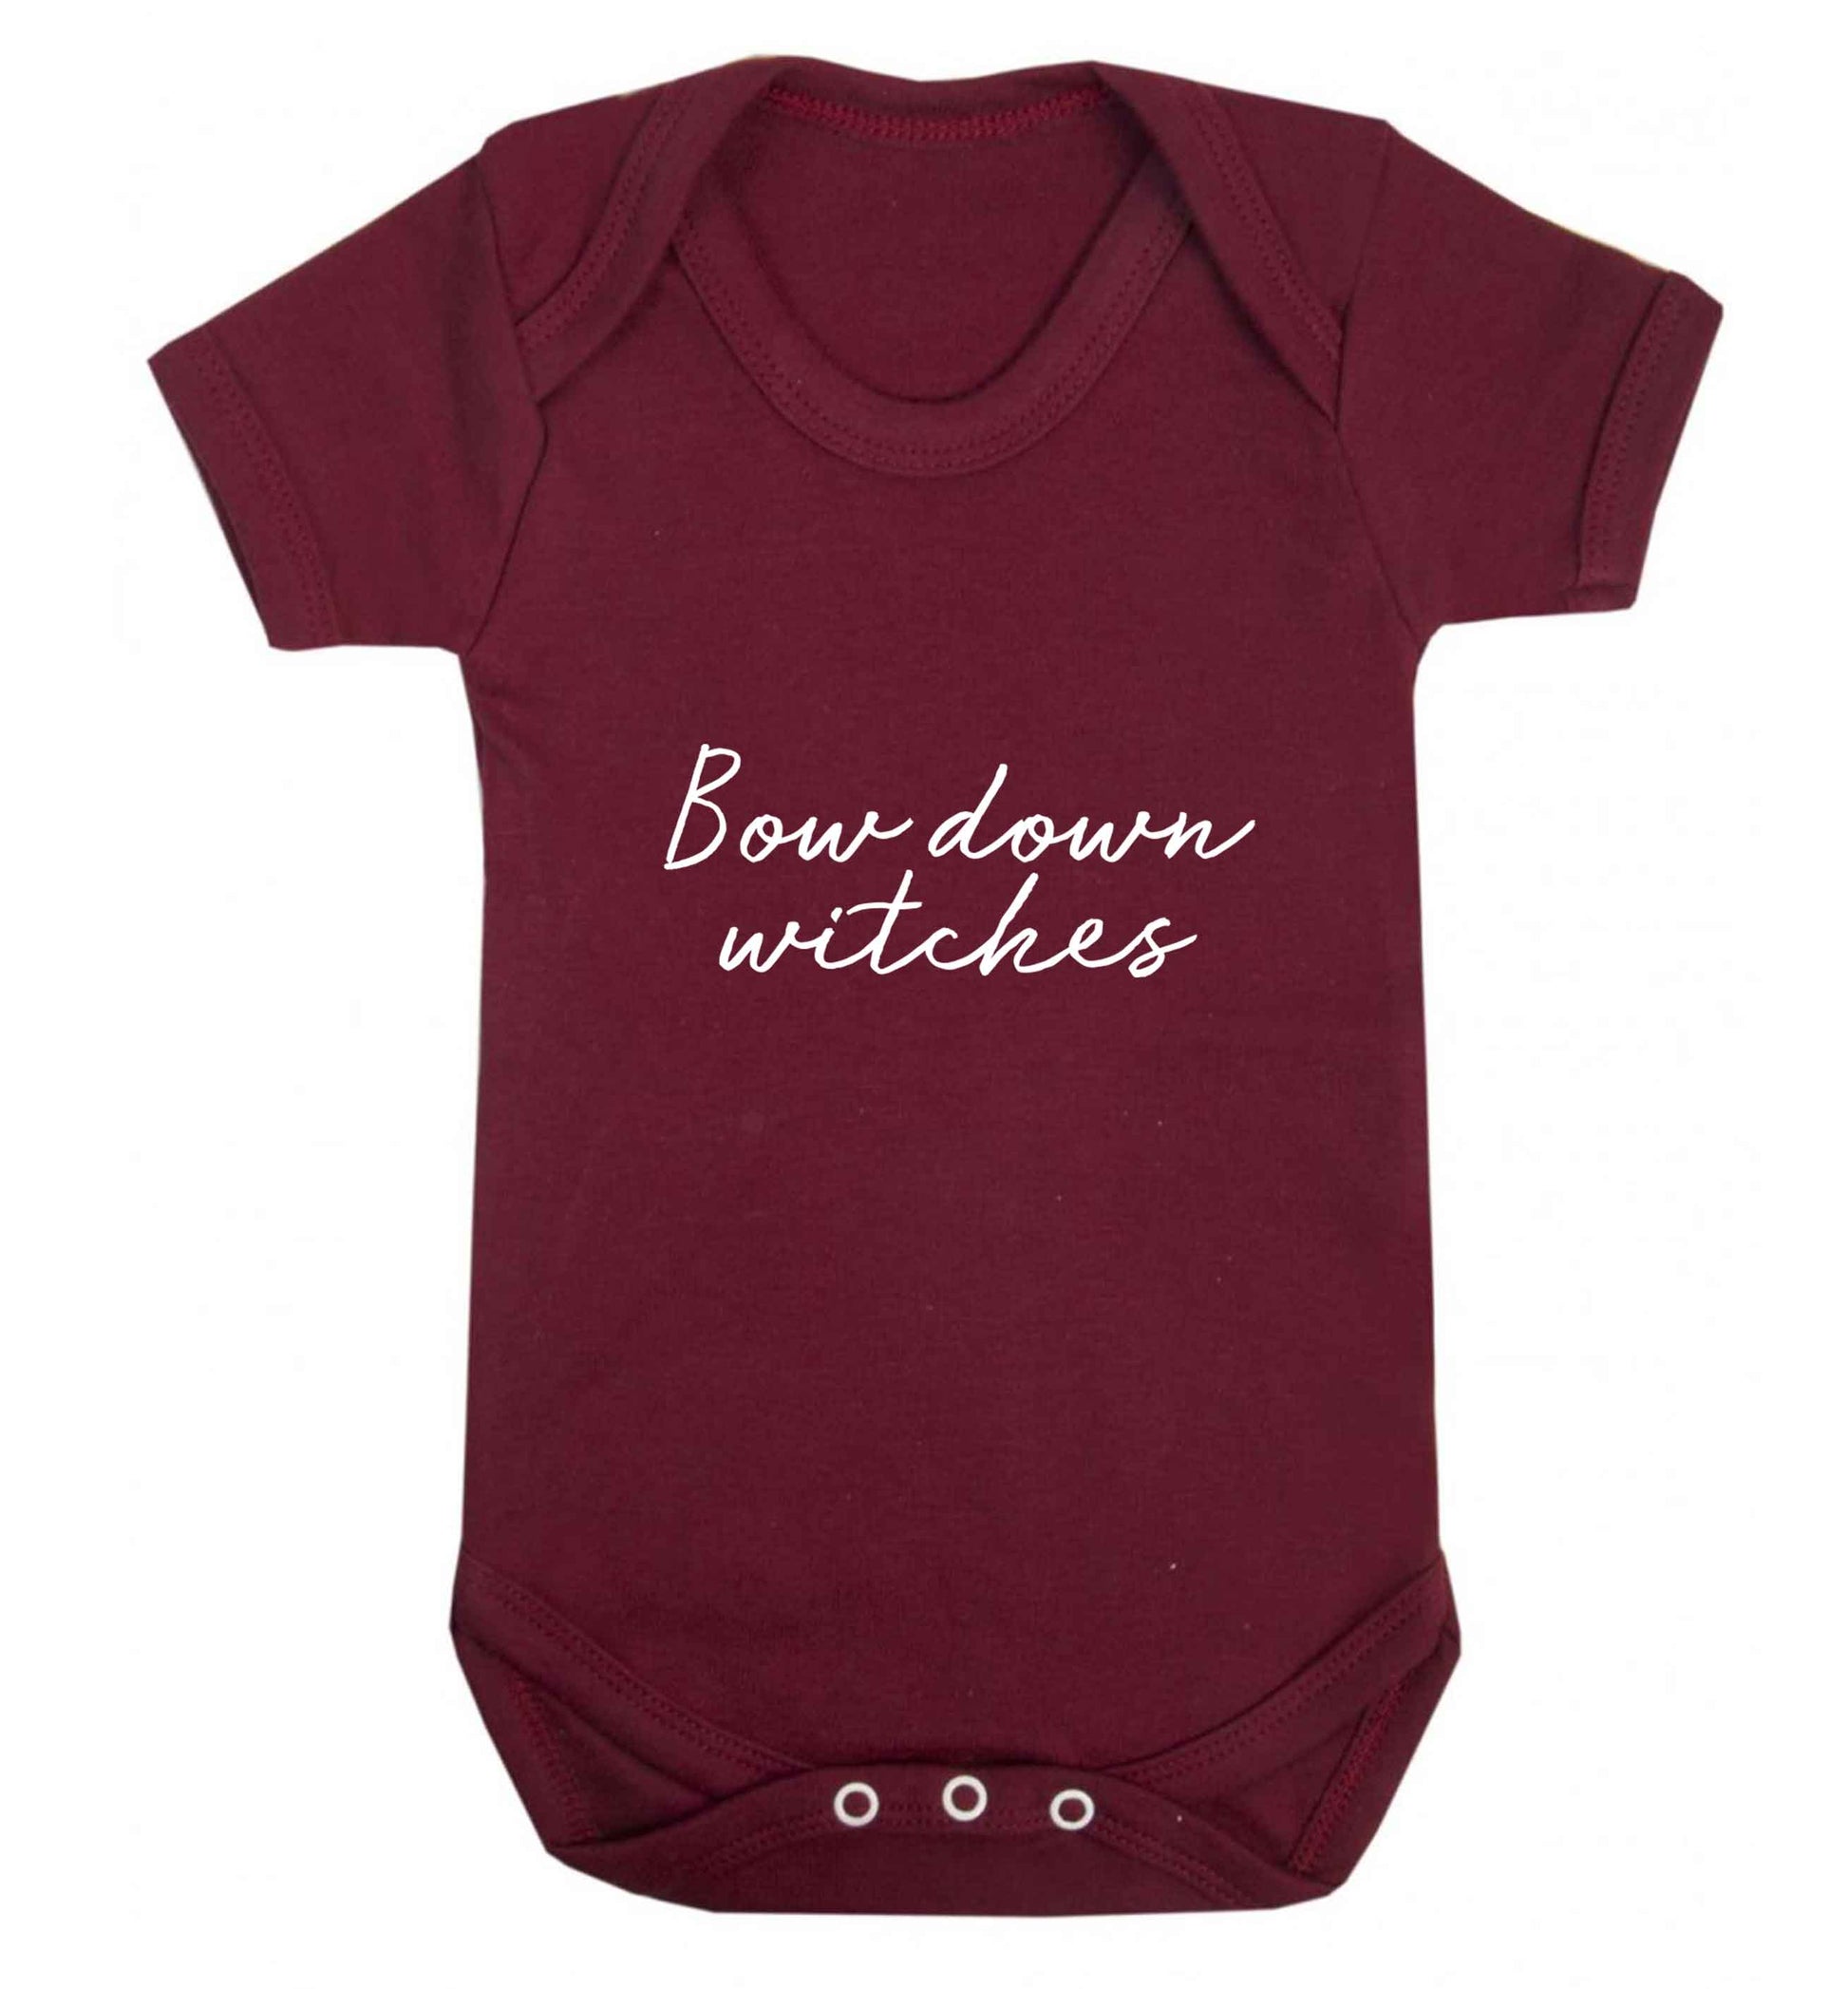 Bow down witches baby vest maroon 18-24 months